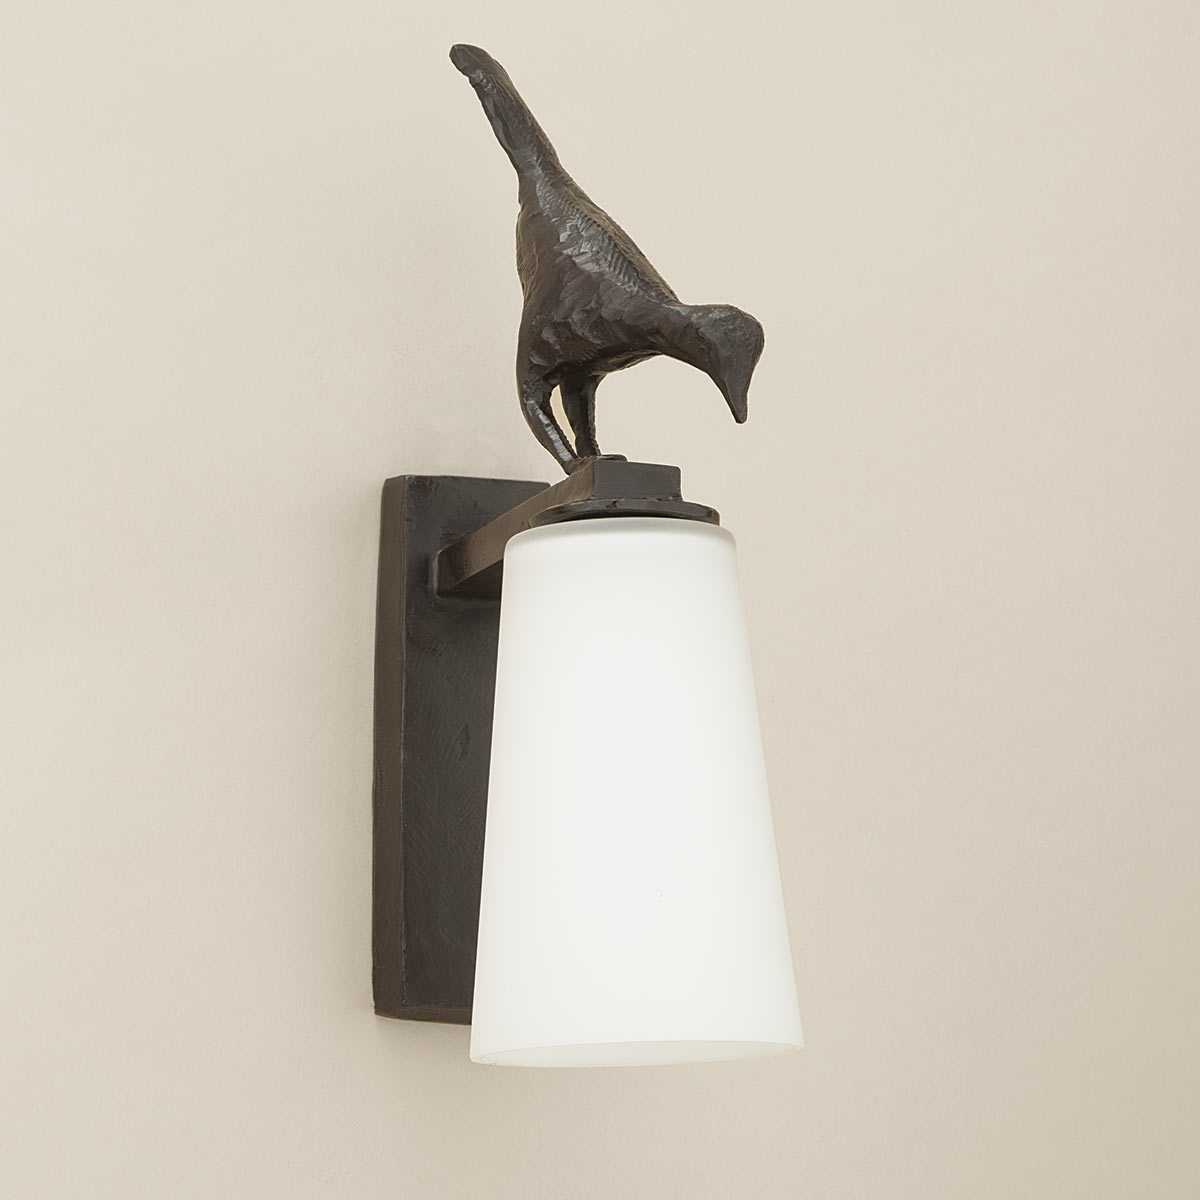 Charming wall light with bird decor made of cast bronze Pia